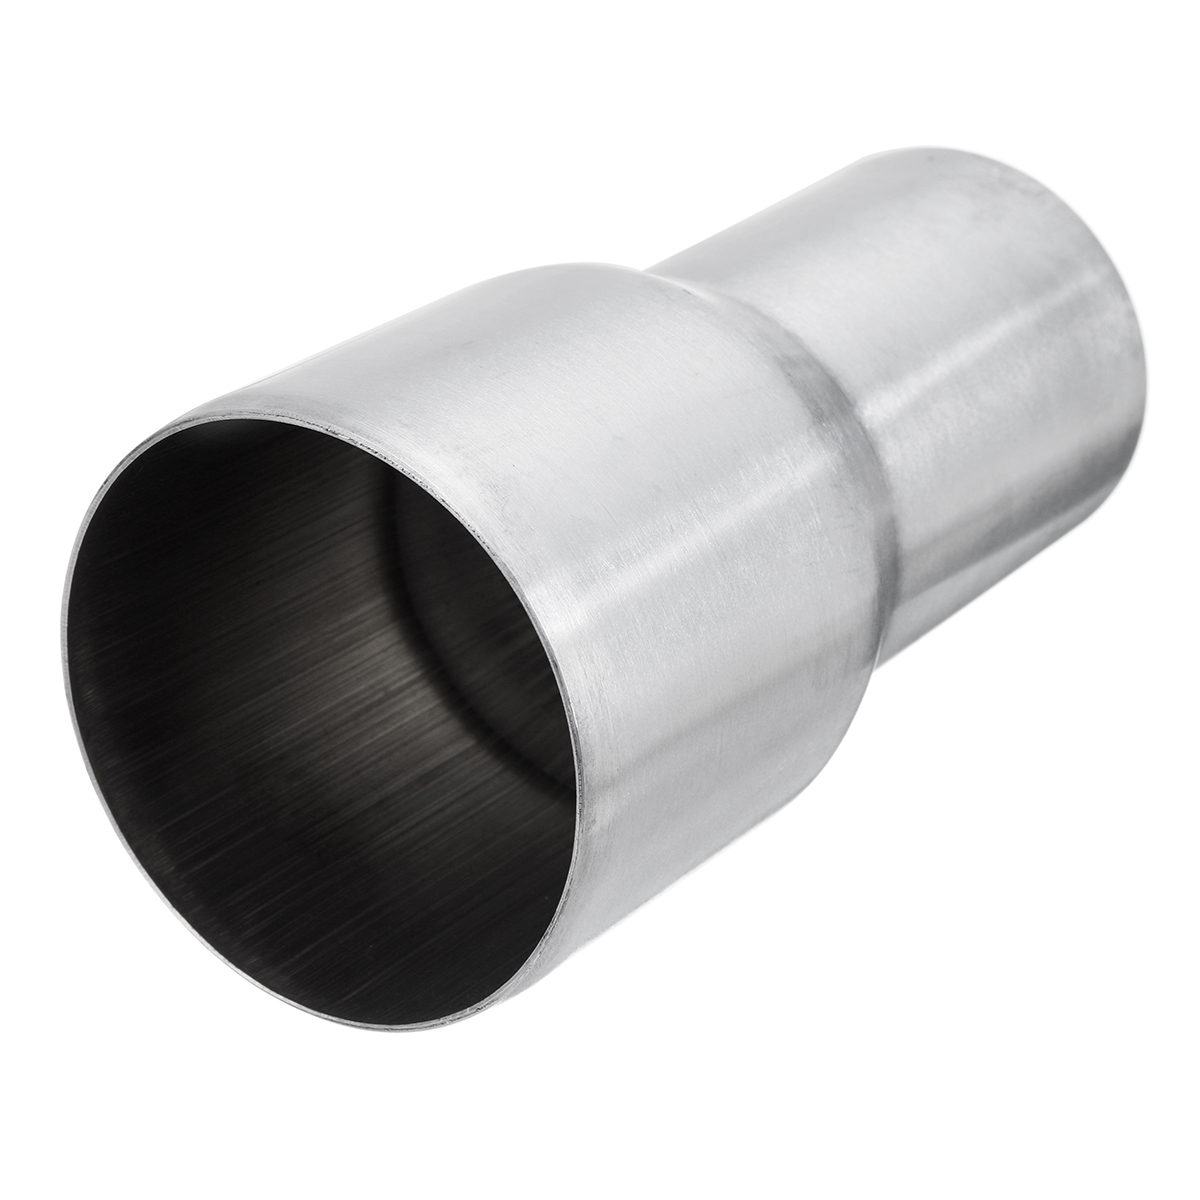 Other Exhausts & Exhaust Systems - 2.5 Inch To 2 Inch Exhaust Reducer